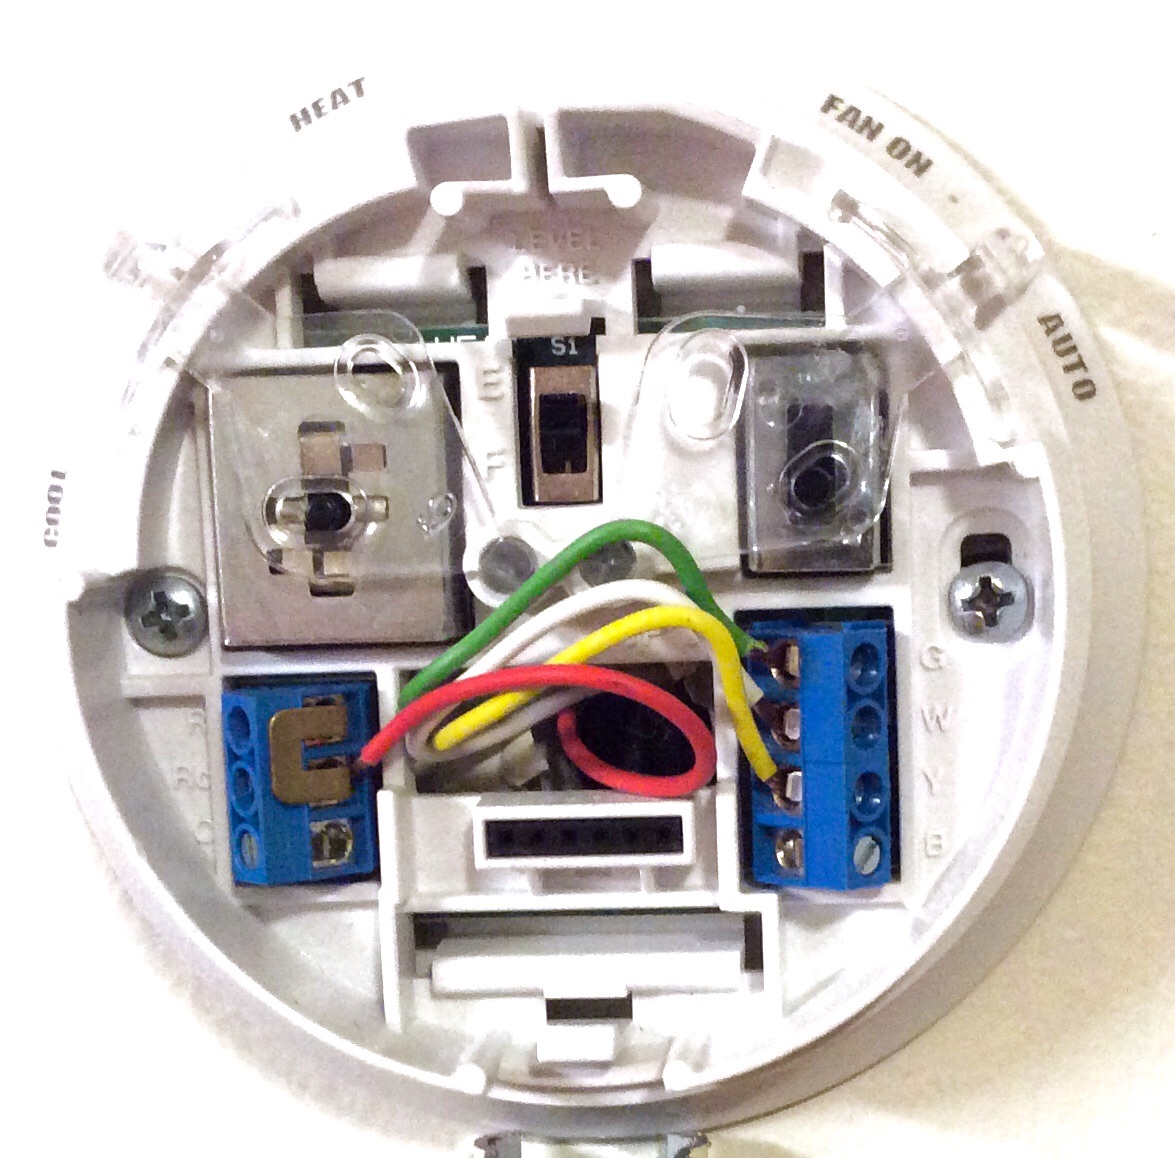 Honeywell Thermostat Wiring Color Code Tom's Tek Stop